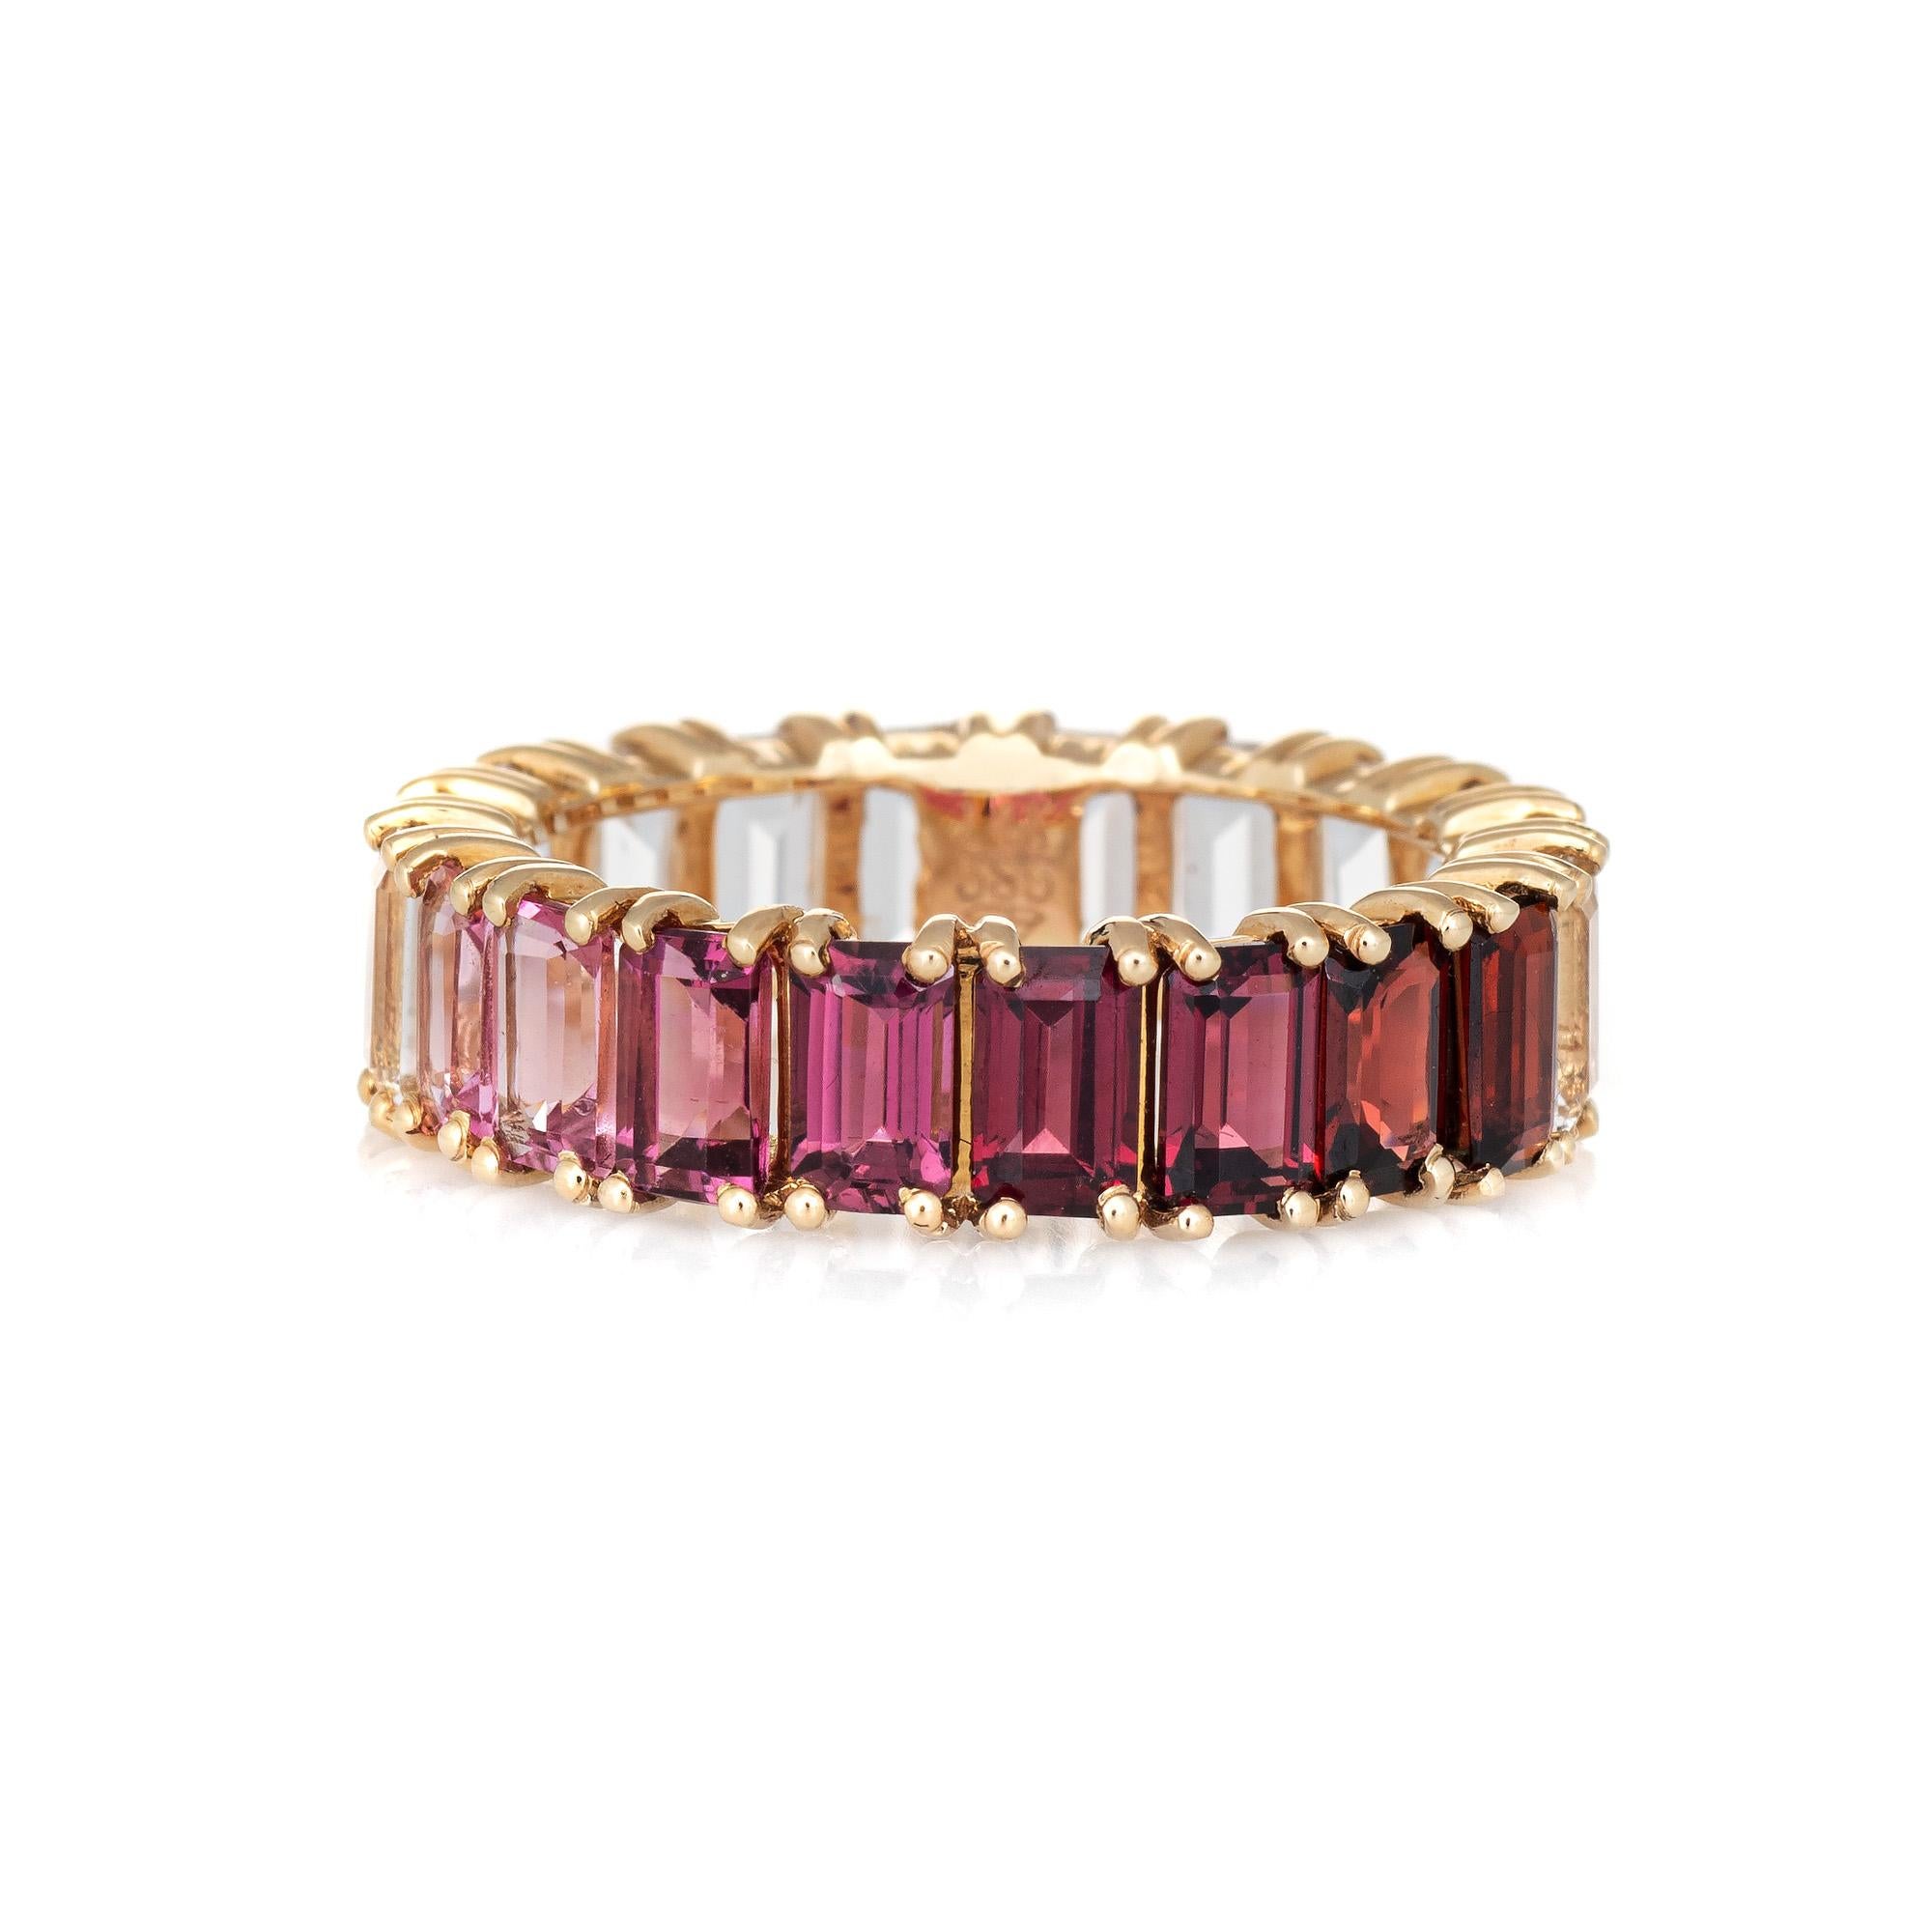 Elegant estate rainbow semi precious gemstone eternity band crafted in 14 karat yellow gold. 

20 emerald cut stones (white topaz, garnet & pink tourmaline) are estimated at 0.50 carats each, totaling an estimated 10 carats. The stones are in